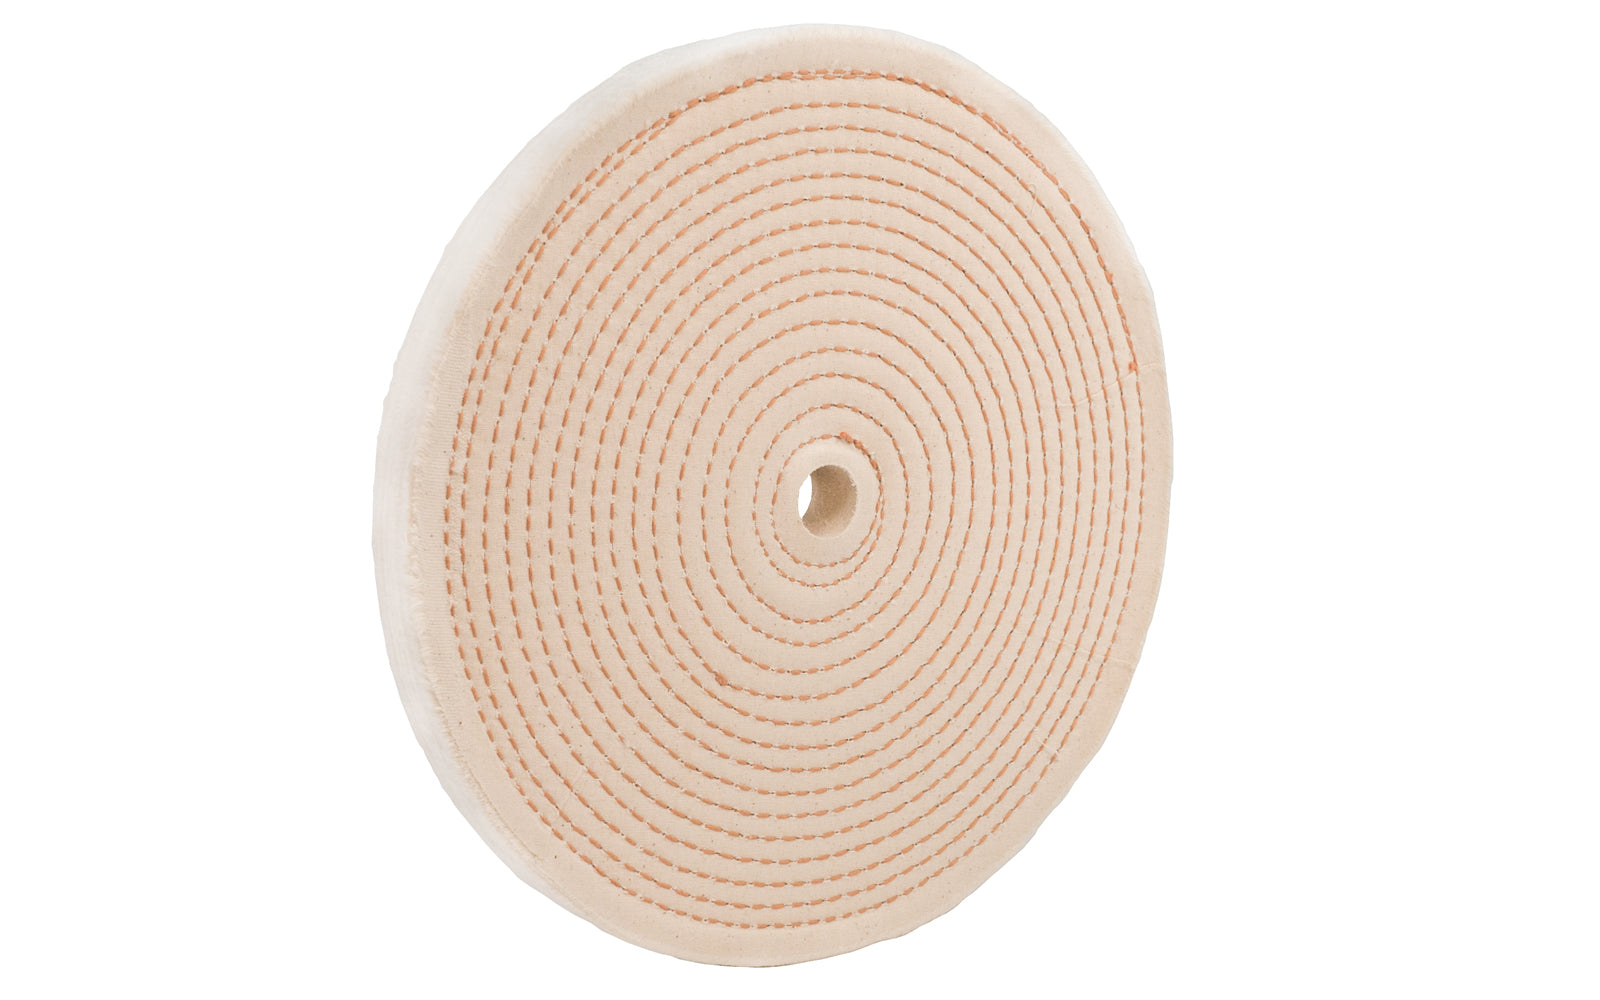 10" Spiral Sewn Buffing Wheel ~ 1" Thick is a workhorse for aggressive cutting & coarse buffing. 3/4" hole diameter. 1" wide thickness. Made in USA. spiral sewn wheel for prolong service. For coarse cutting & buffing, & flexible grinding. Stiffer cotton sheeting held together with 1/4" wide spiral sewn lockstitch sewing. Dico 528-80-10